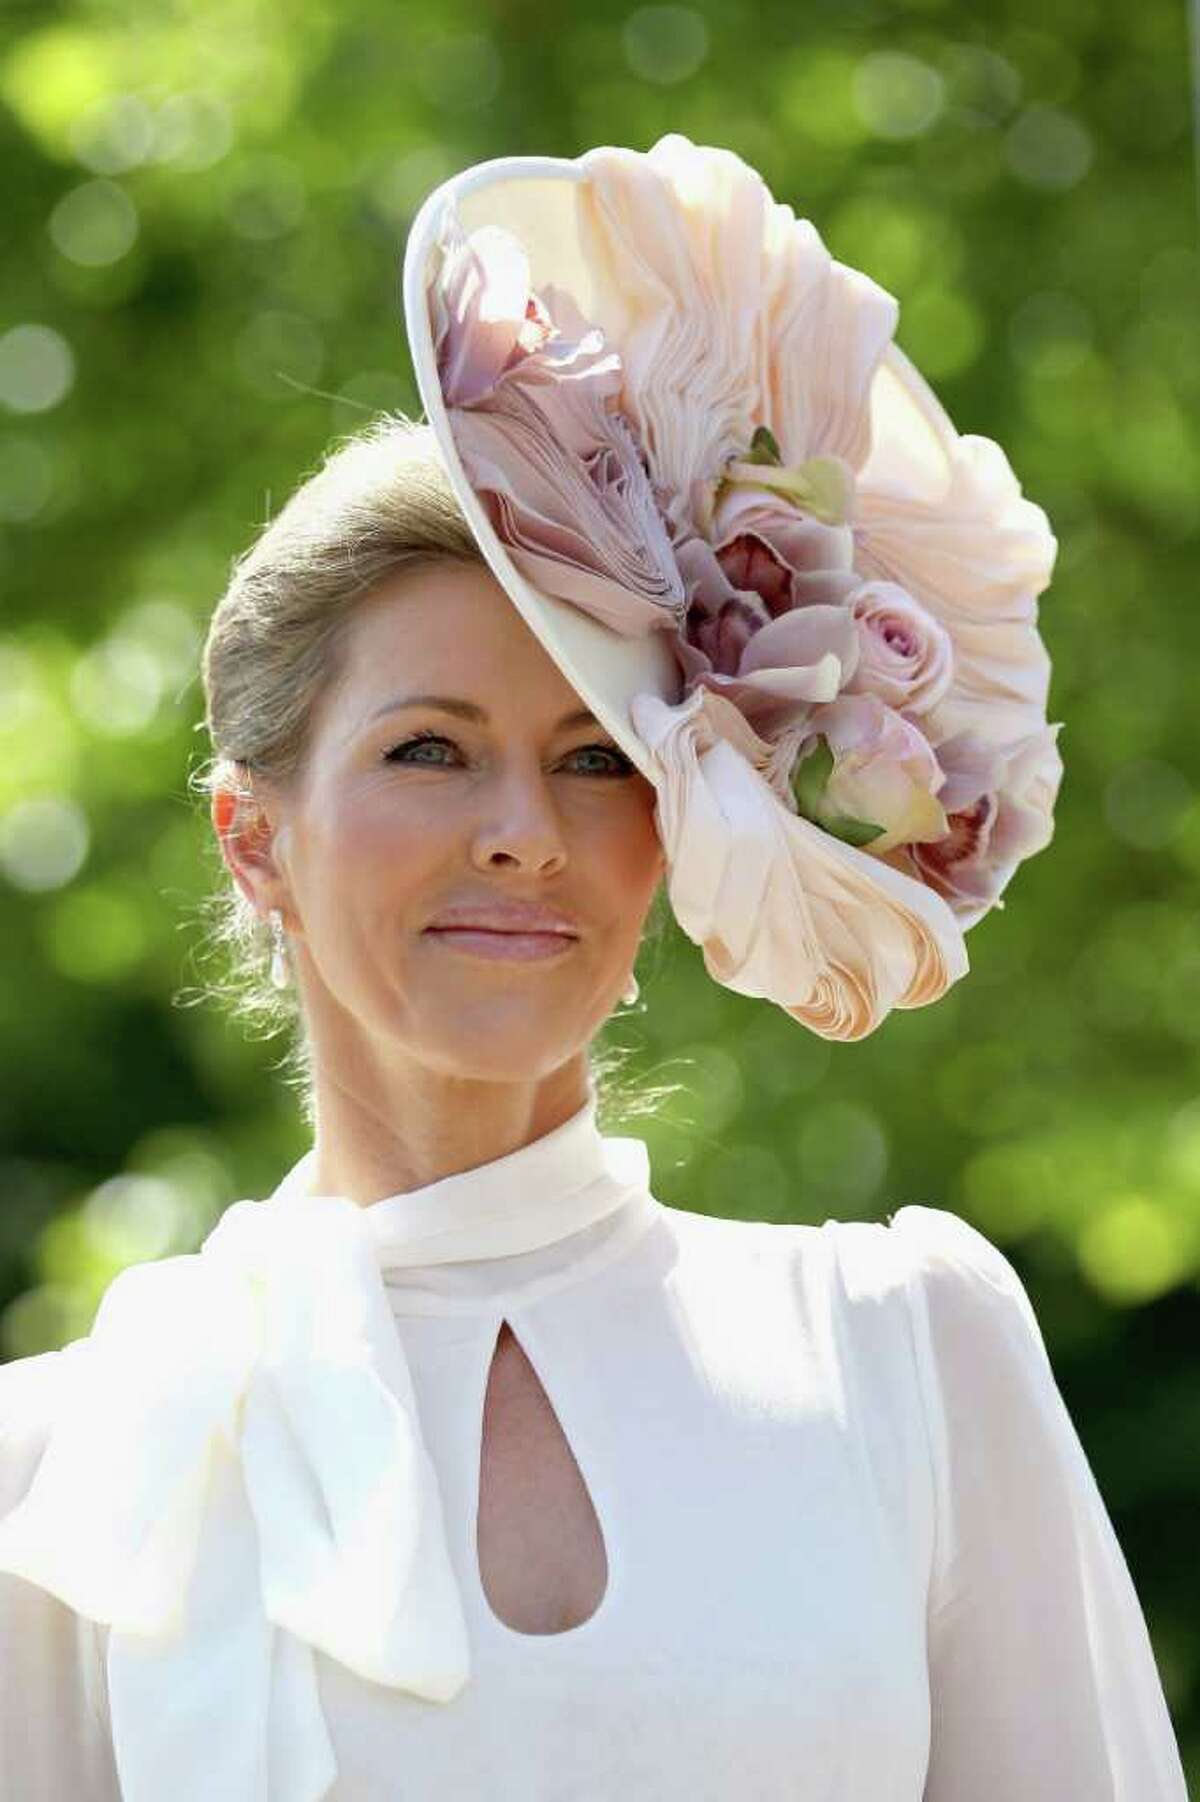 ASCOT, ENGLAND - JUNE 14: Belinda Stradwick poses for a photograph as she arrives for the opening day of Royal Ascot at Ascot Racecourse on June 14, 2011 in Ascot, United Kingdom. (Photo by Chris Jackson/Getty Images)